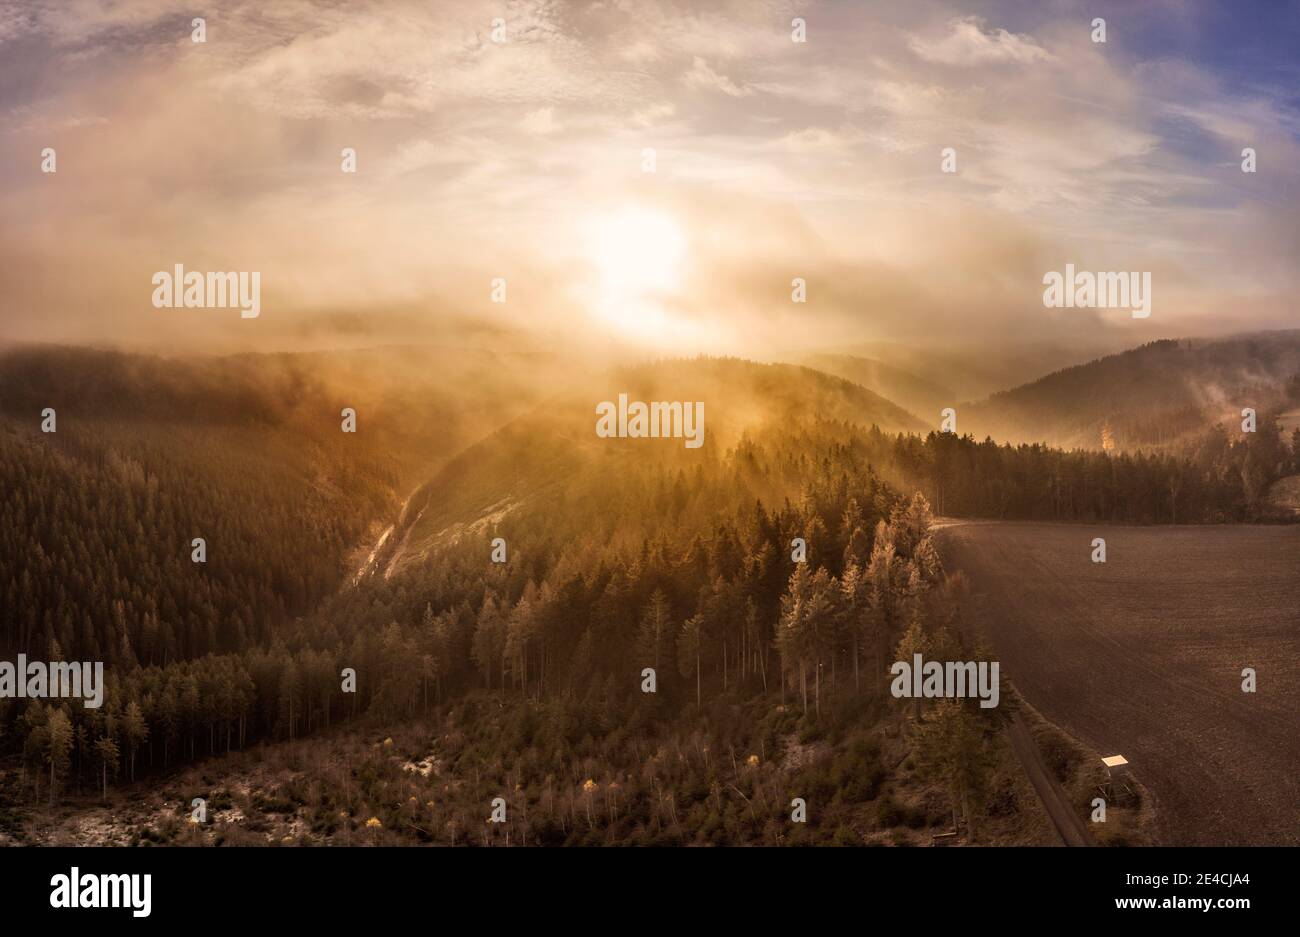 Germany, Thuringia, Großbreitenbach, Allersdorf, valleys, forest, mountains, road, sunrise, back light, aerial view Stock Photo